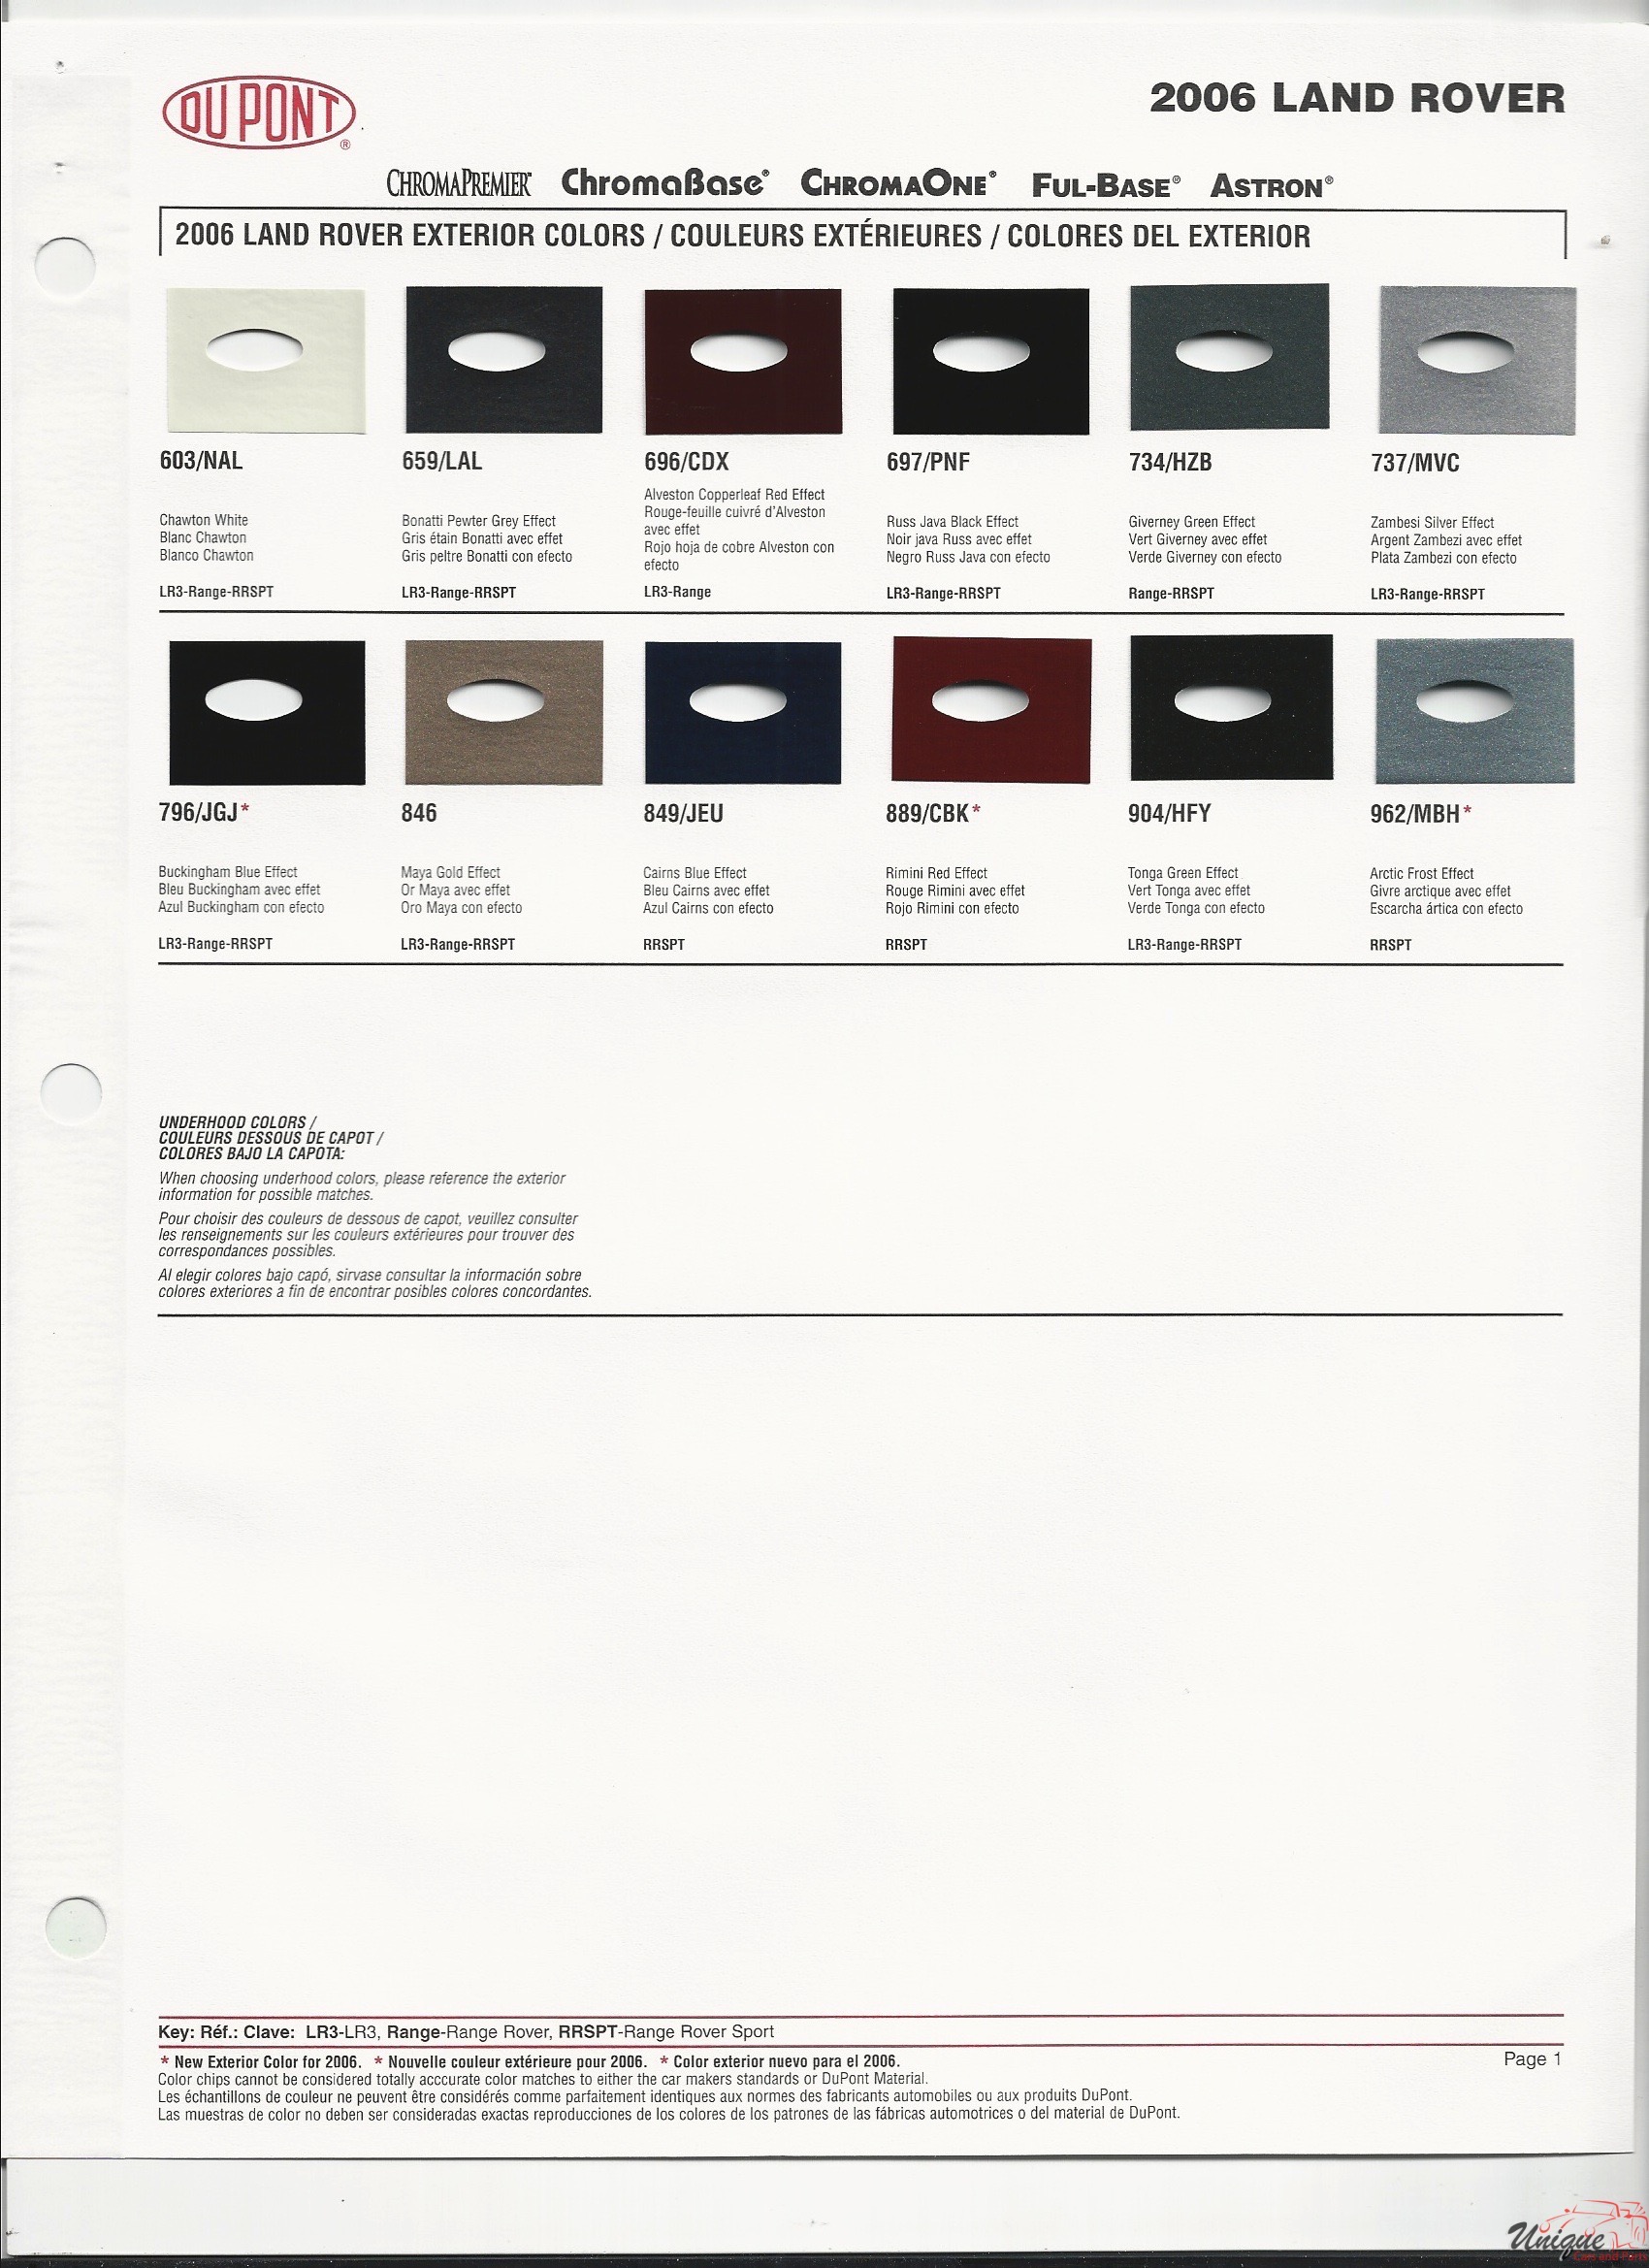 2006 Land Rover Paint Charts